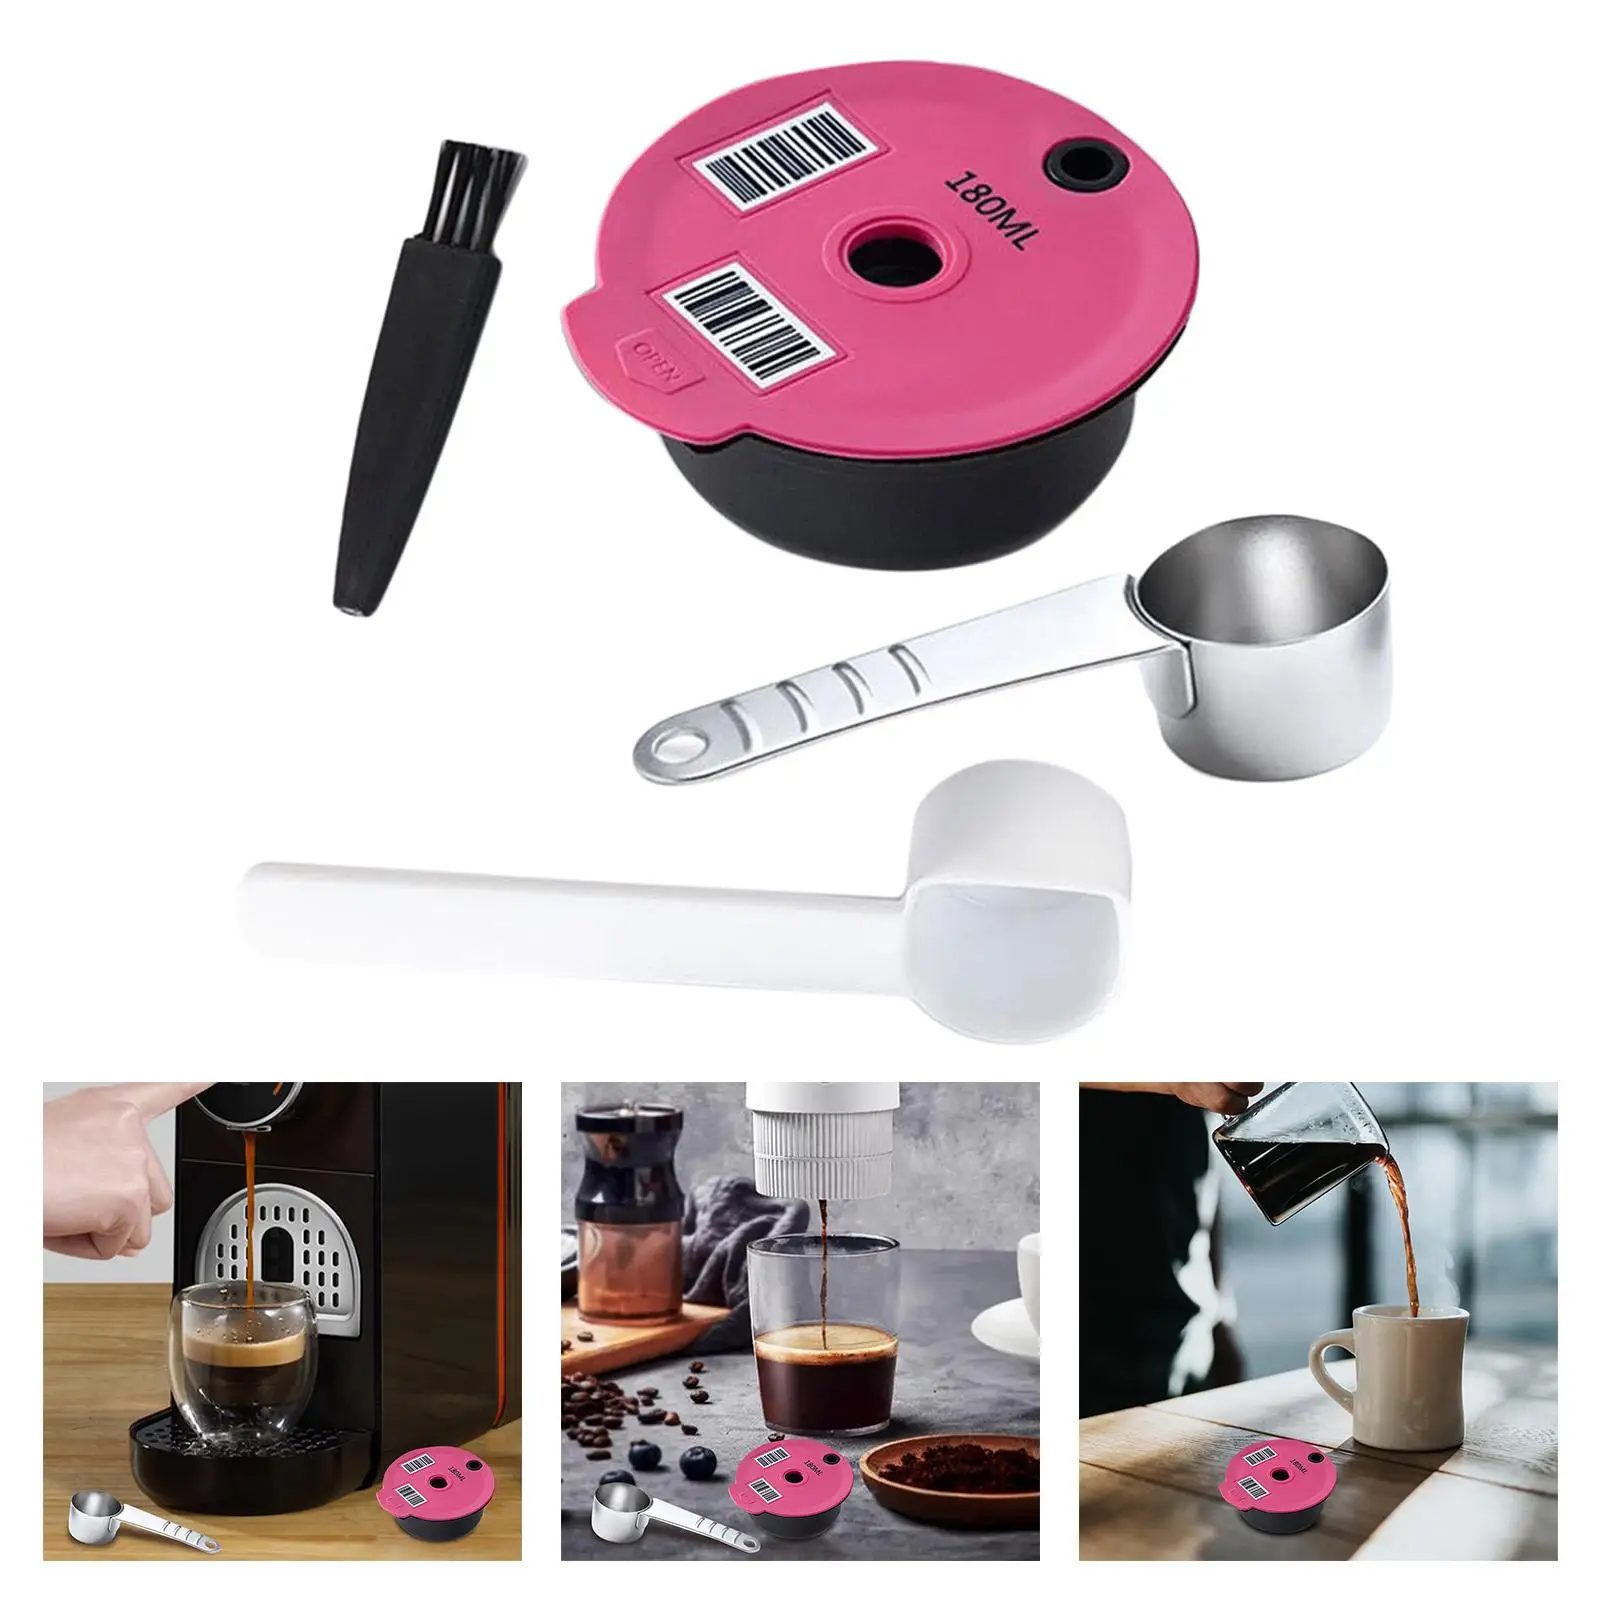   with Cleaning Brush and Spoon Coffee Pod Refillable Pod 1003/01, Tas5552UC/05, Tas1403/02 Coffee Machine